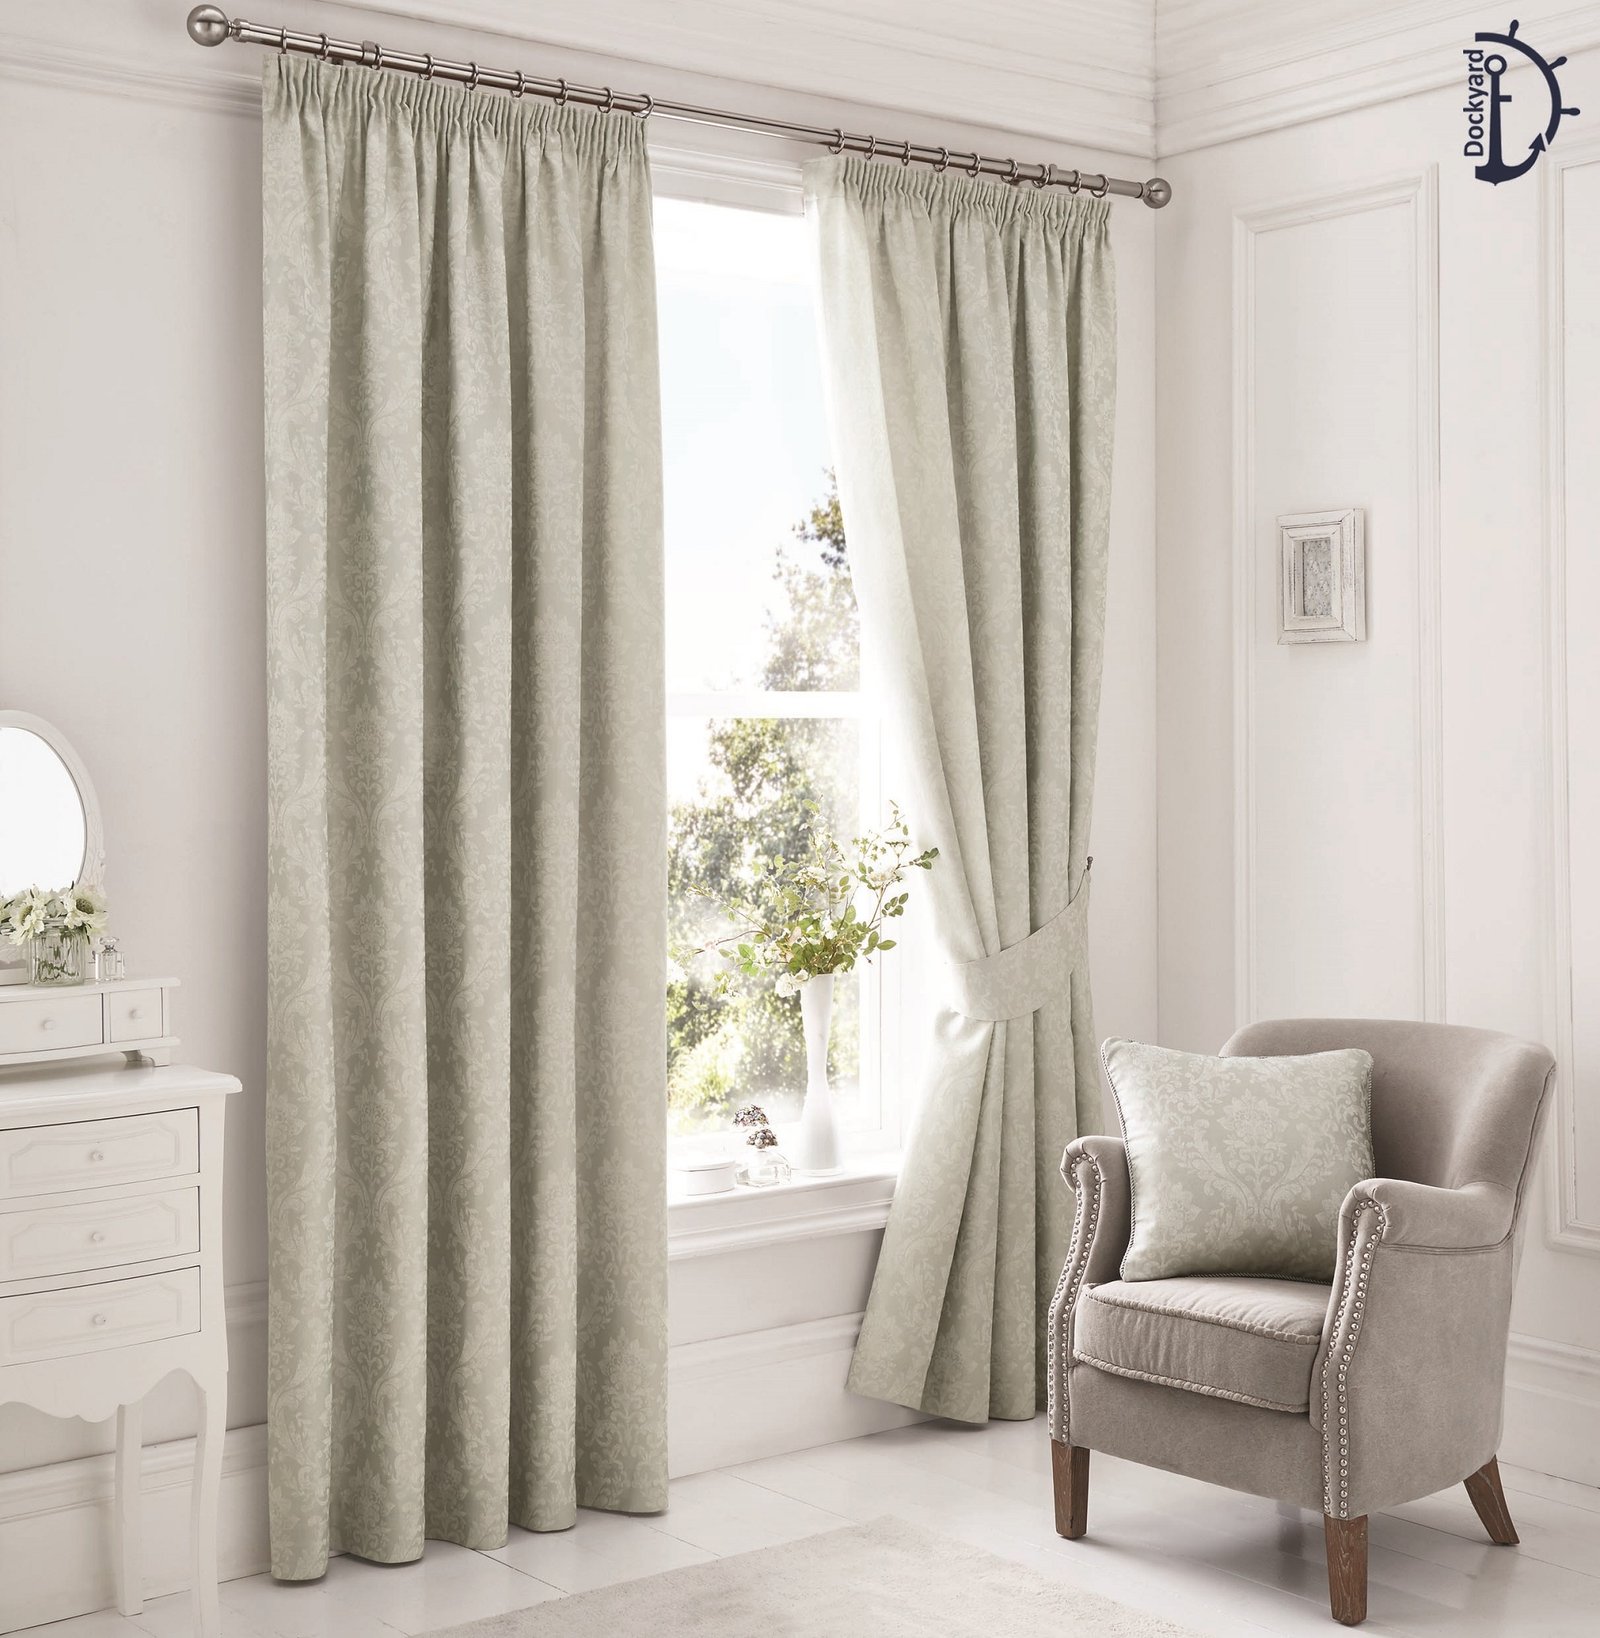 Royal Damask Jacquard Curtains for room - Light Grey | Tape Top Curtain ...